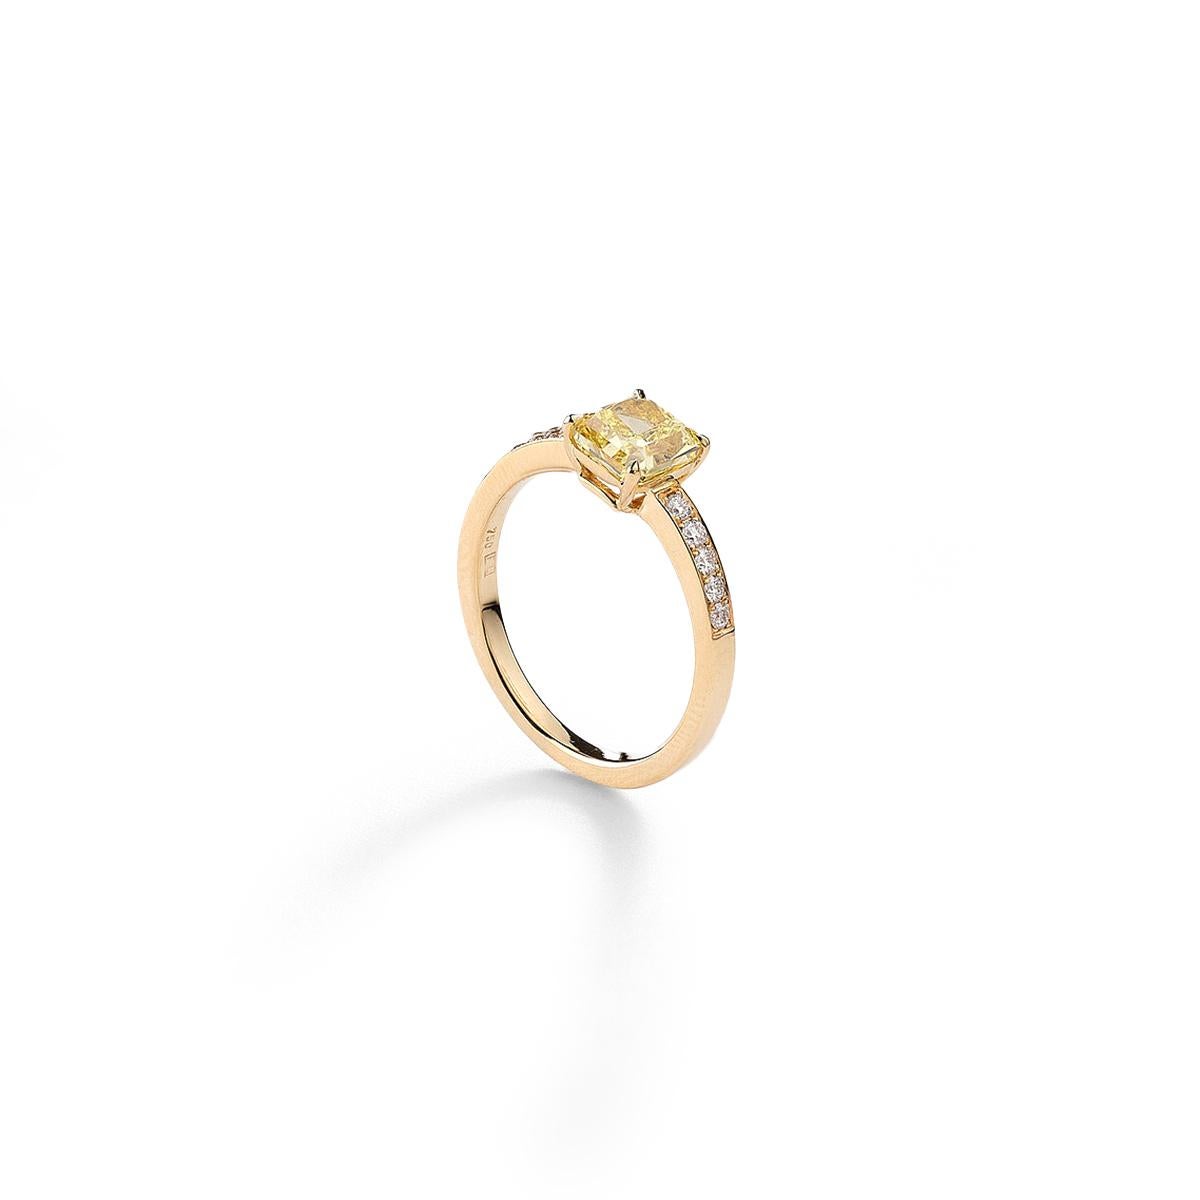 Ring in 18kt yellow gold set with one Fancy Yellow IF square cut diamond 1.33 cts and 10 diamonds  0.16 cts GIA Certificate  Size 53          